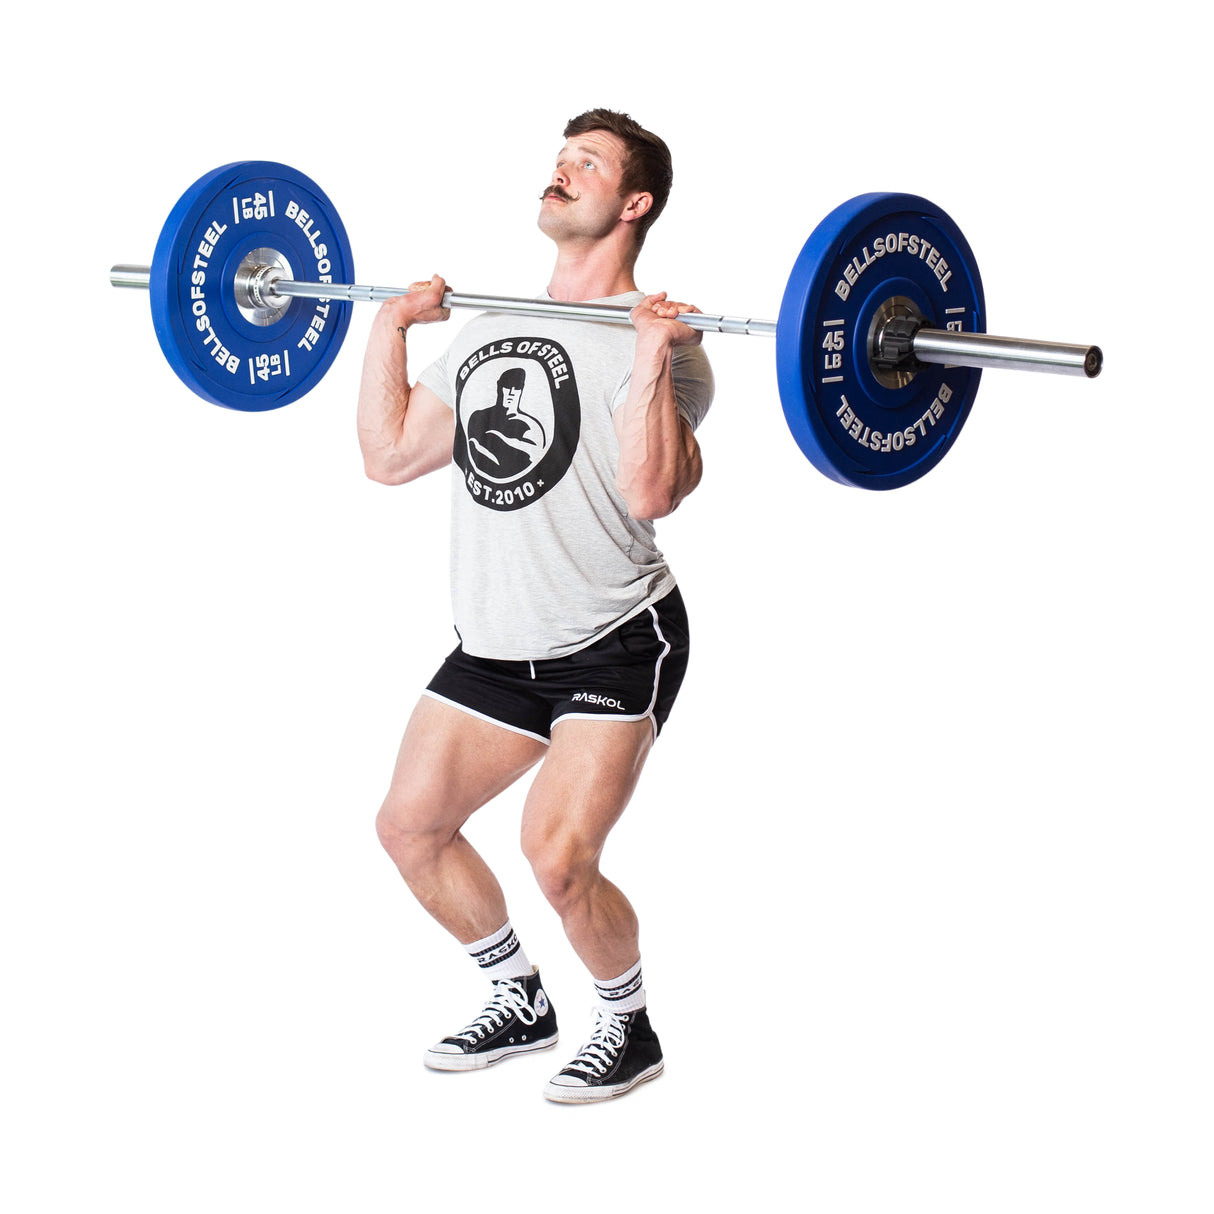 Male athlete doing a barbell curl with Urethane Bumper Plates